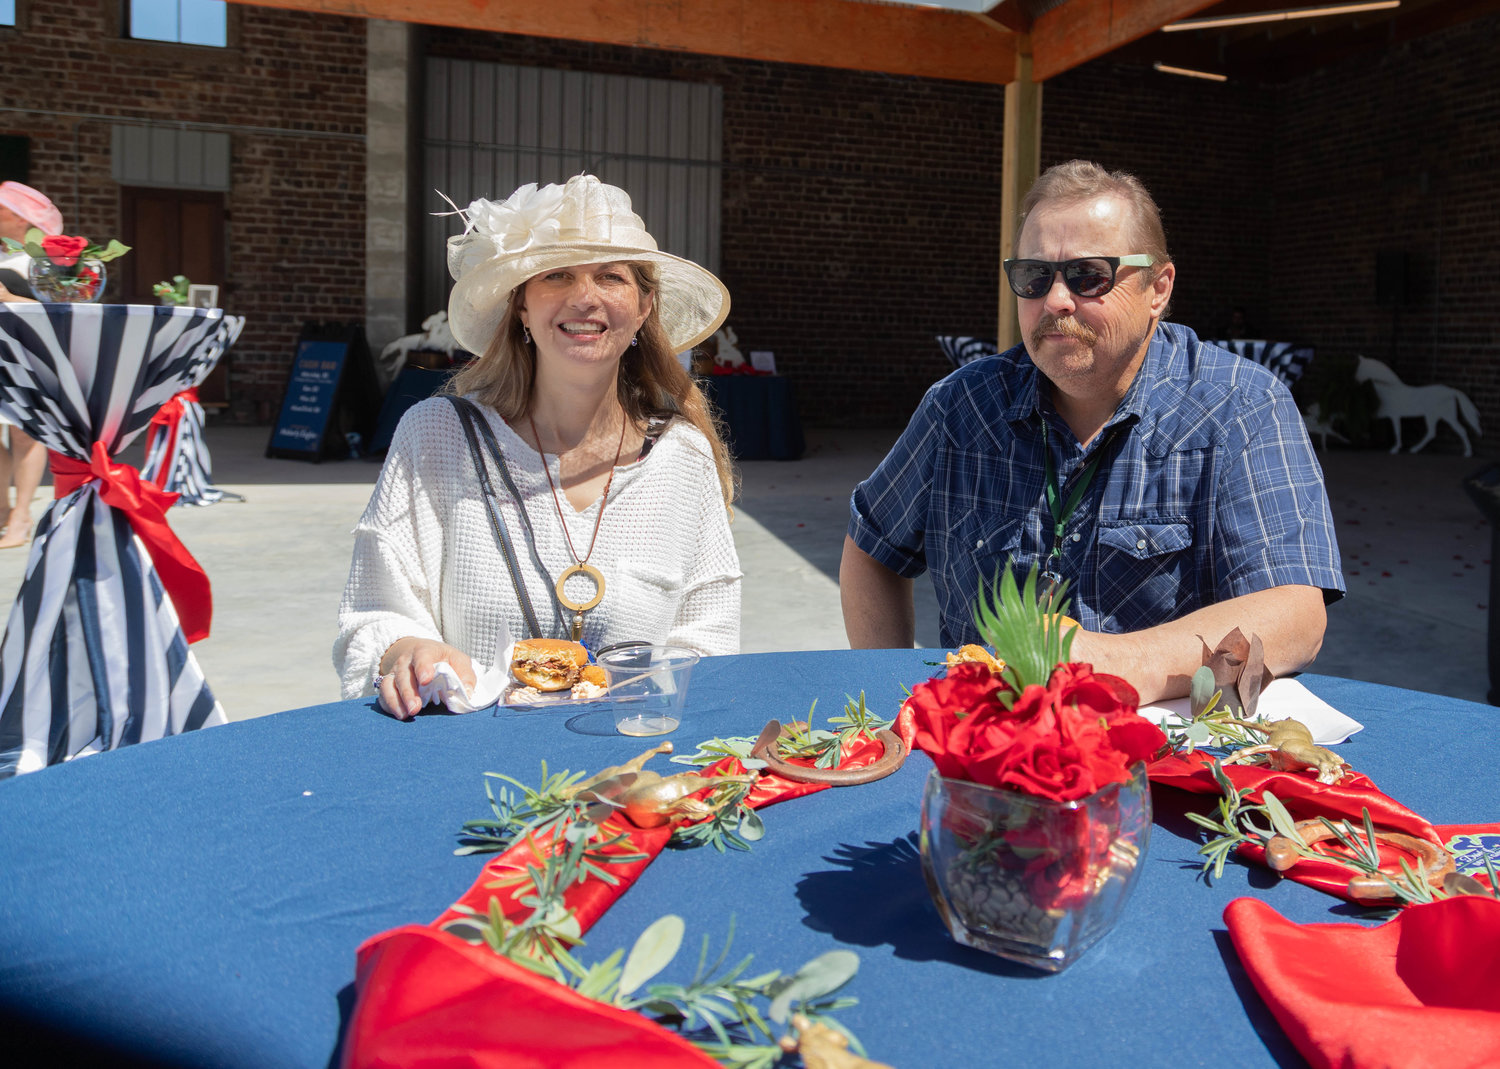 Tammy and Steve Greenwell find a seat in the sun Saturday before the Moberly Area Chamber of Commerce banquet. Jazz music, bourbon and wine tasting and horse-themed games kept guests entertained until time for the awards ceremony and the viewing of the Kentucky Derby.